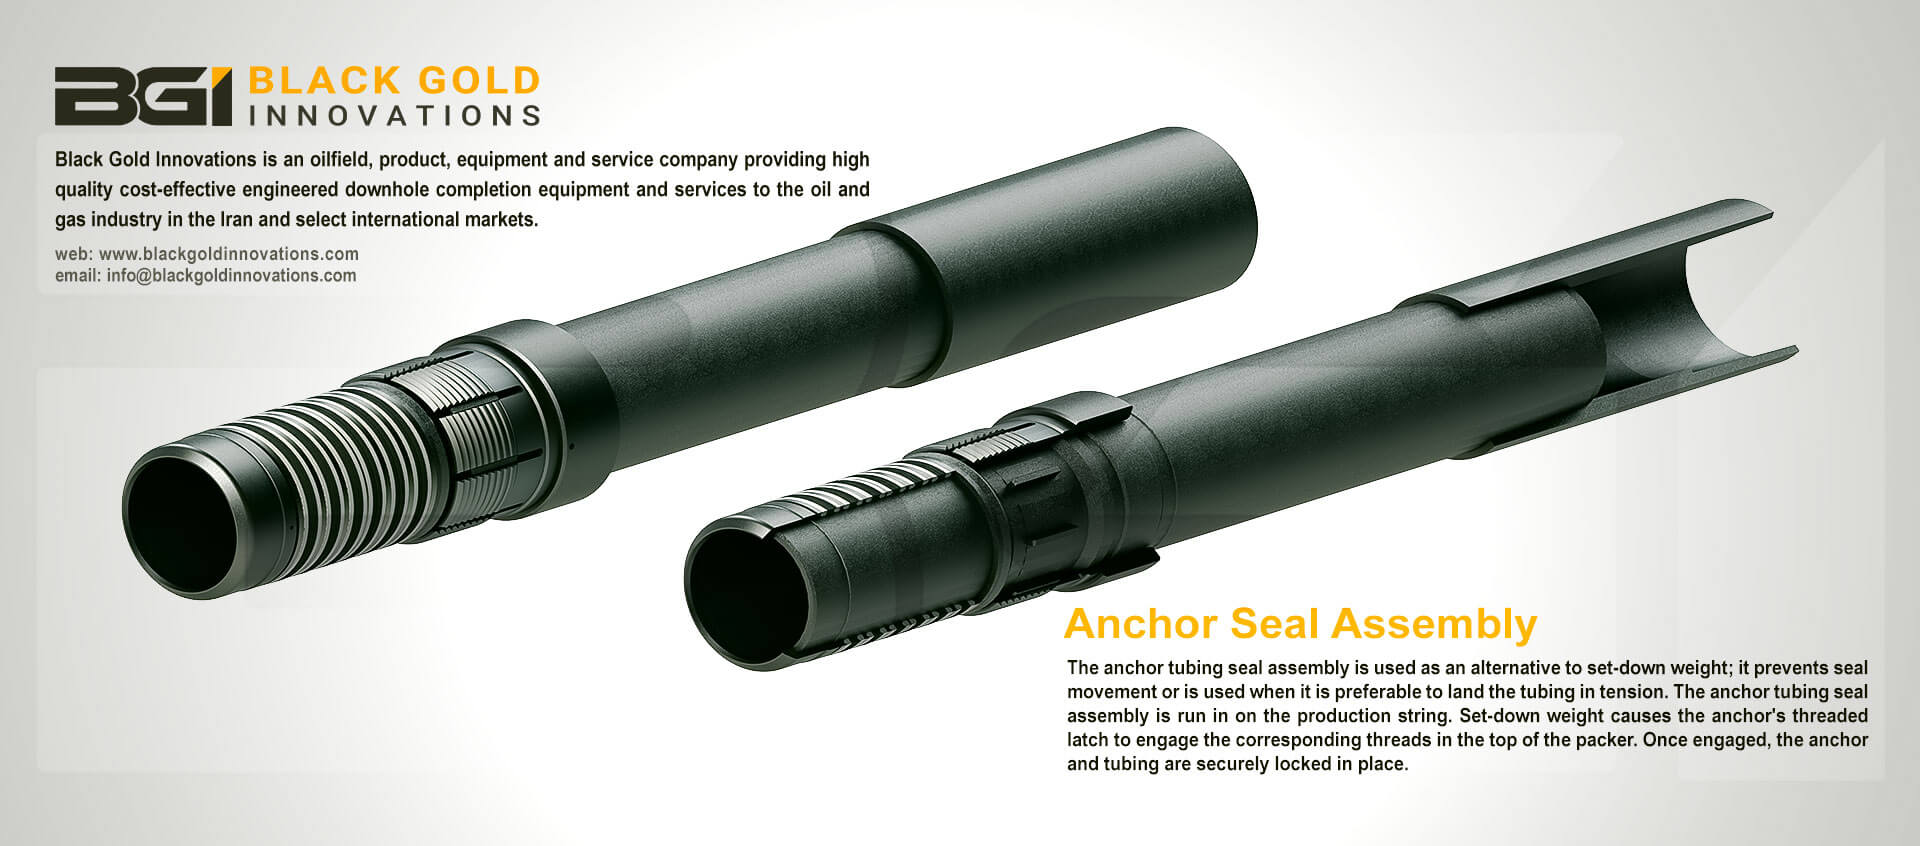 PACKER SYSTEM TOOLS-Anchor Seal Assembly